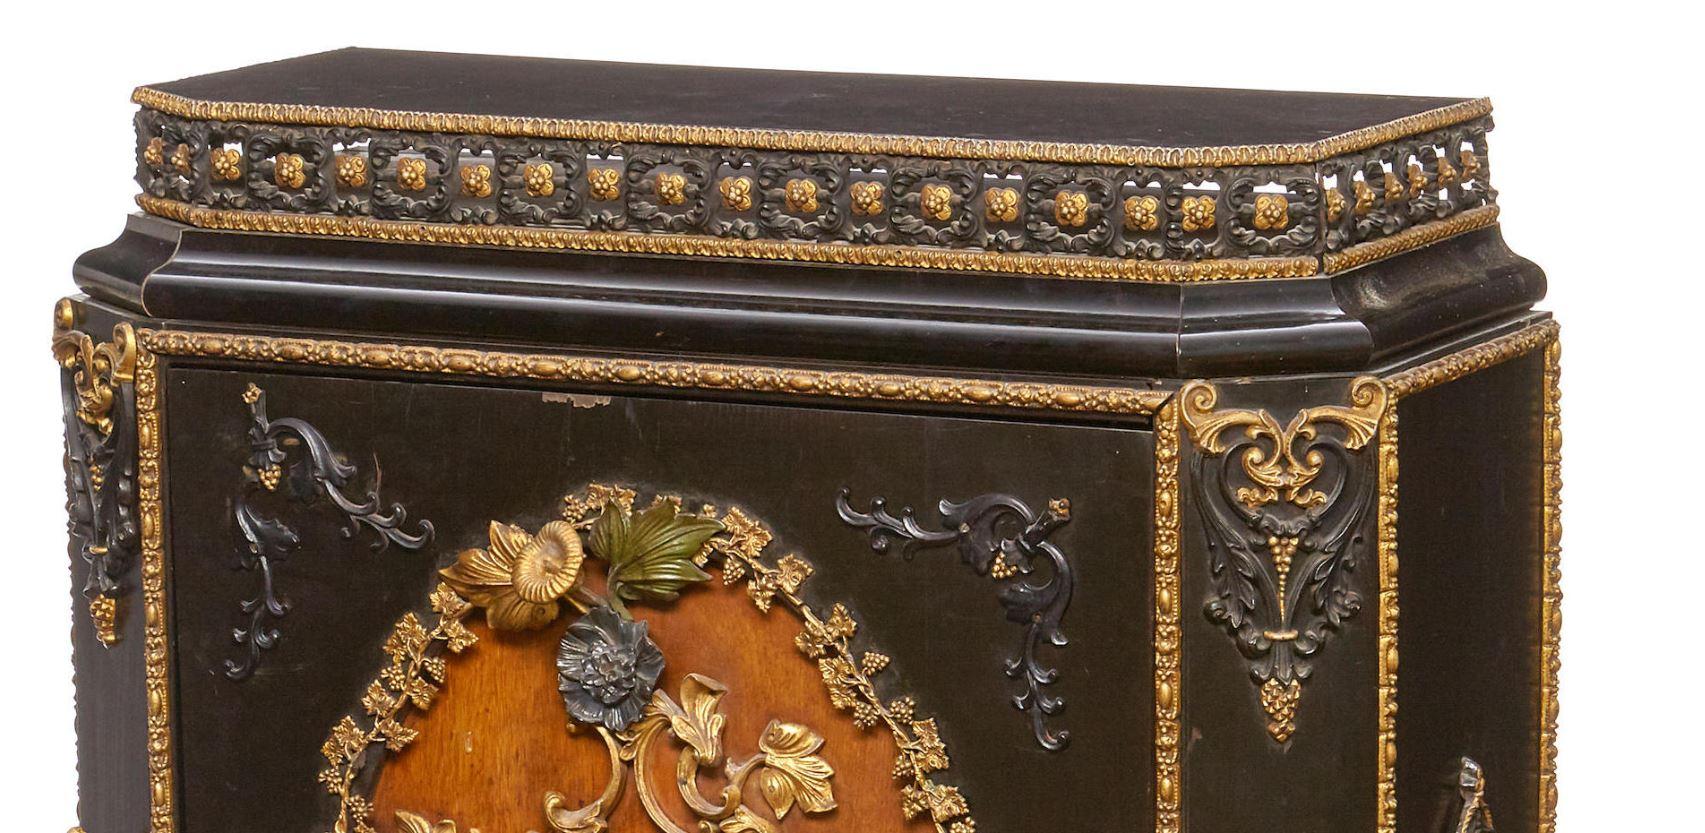 One-of-a-kind and spectacular continental gilt and painted metal mounted ebonized side cabinet, 19th century.

The rectangular ebonized top with a parcel gilt floral motif filigree border is over a large door heavily decorated with intricate